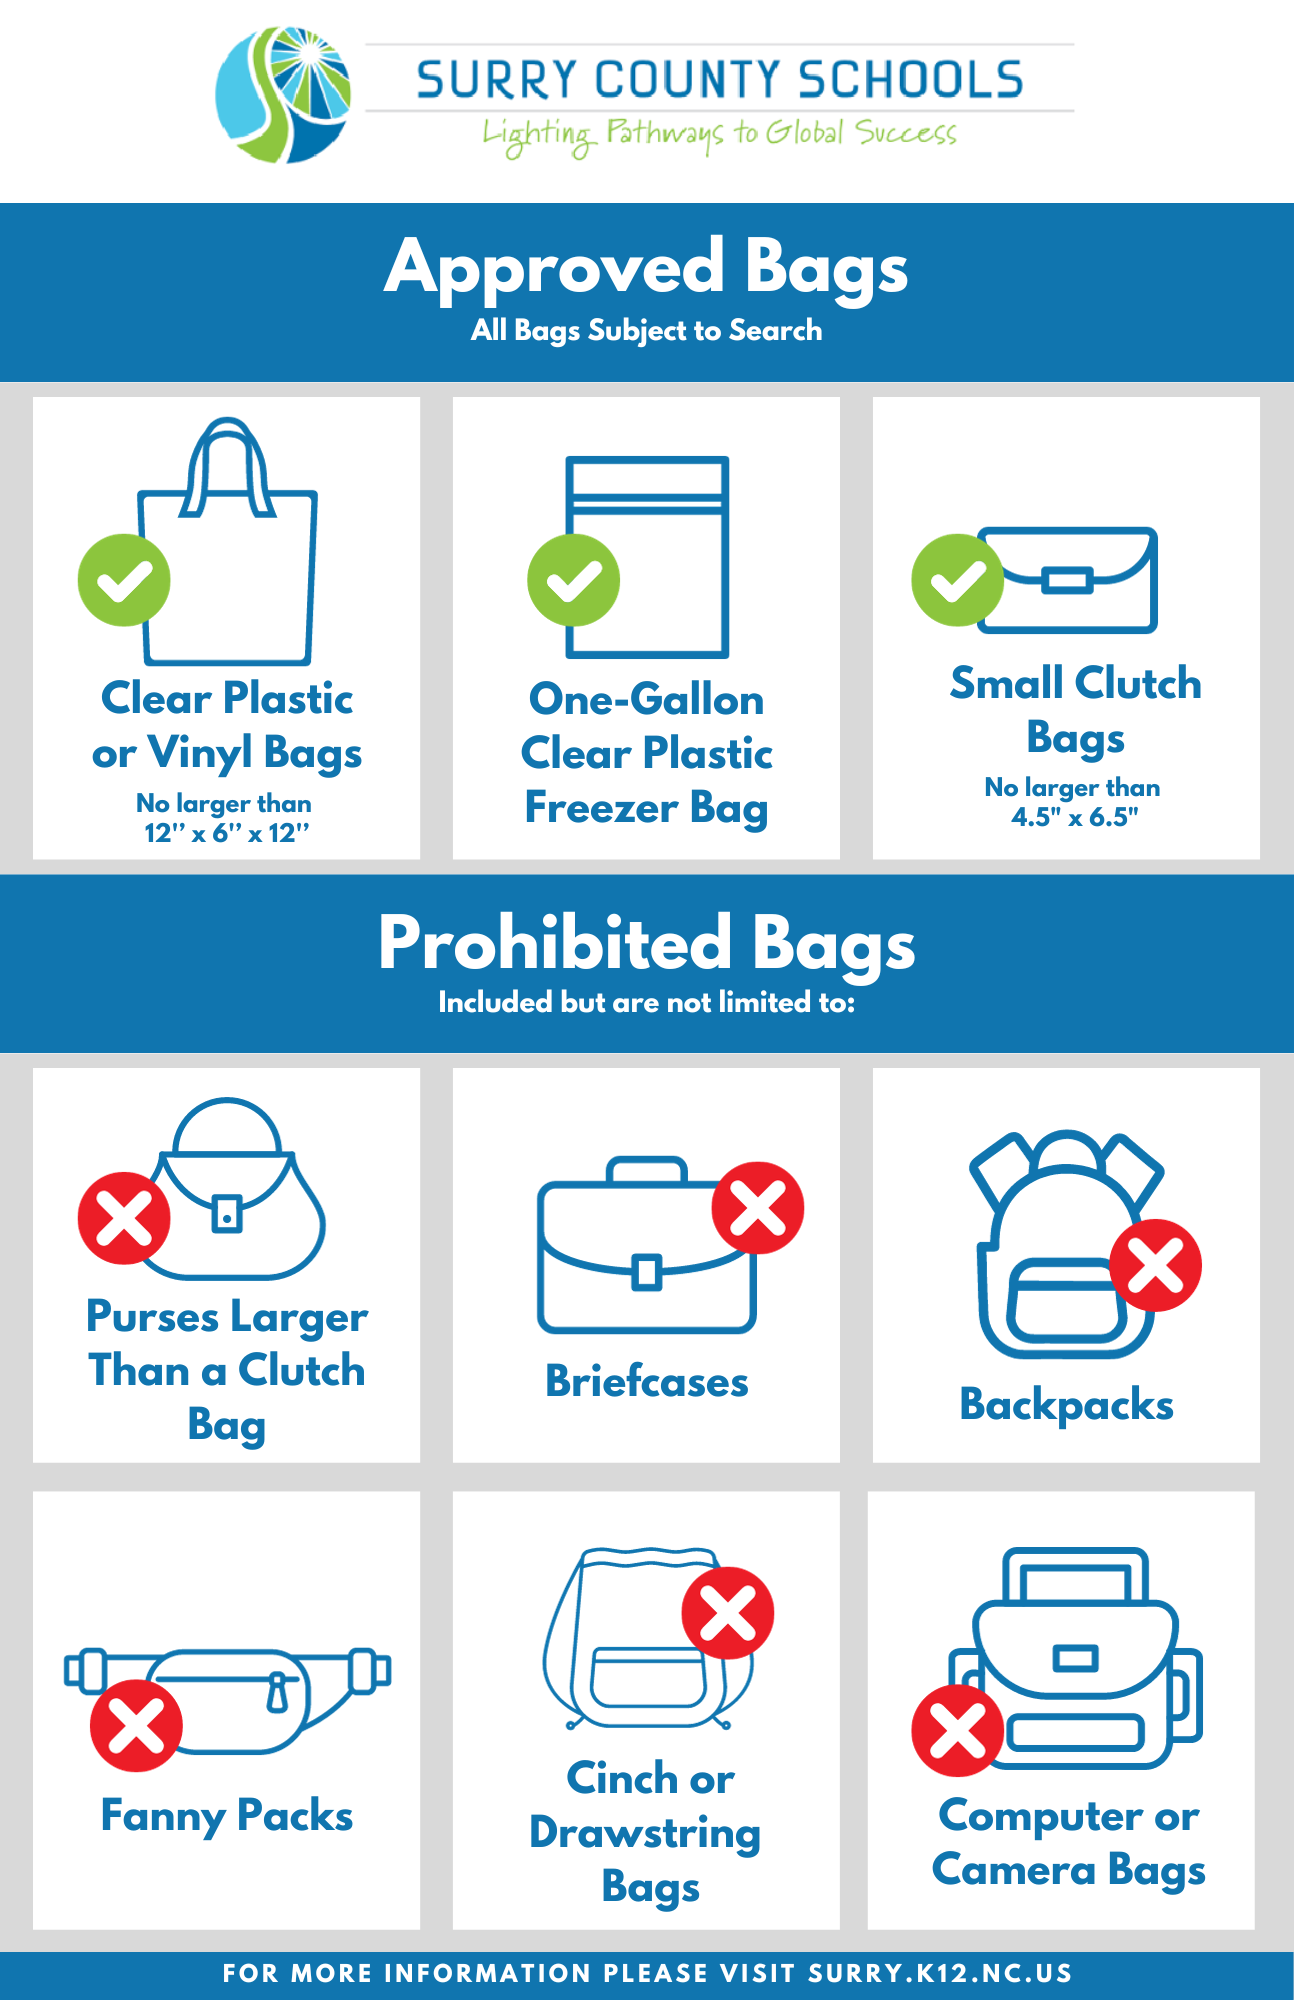 Clear Bag Policy Image